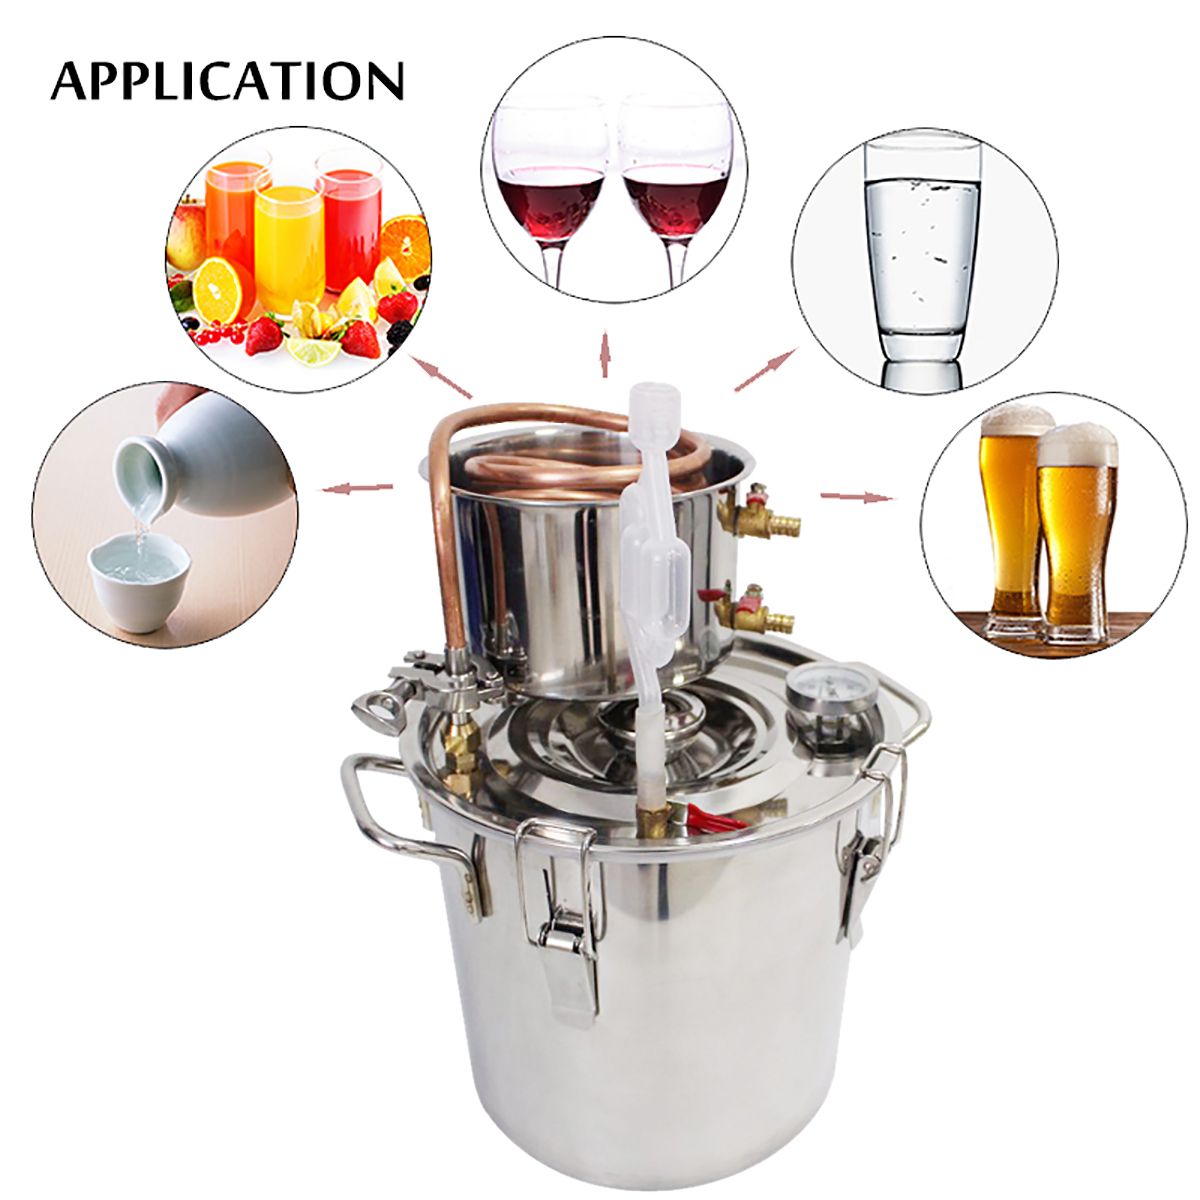 3-Pots-1030L-DIY-Alcohol-Distiller-Water-Alcohol-Still-Boiler-With-Thermometer-1691273